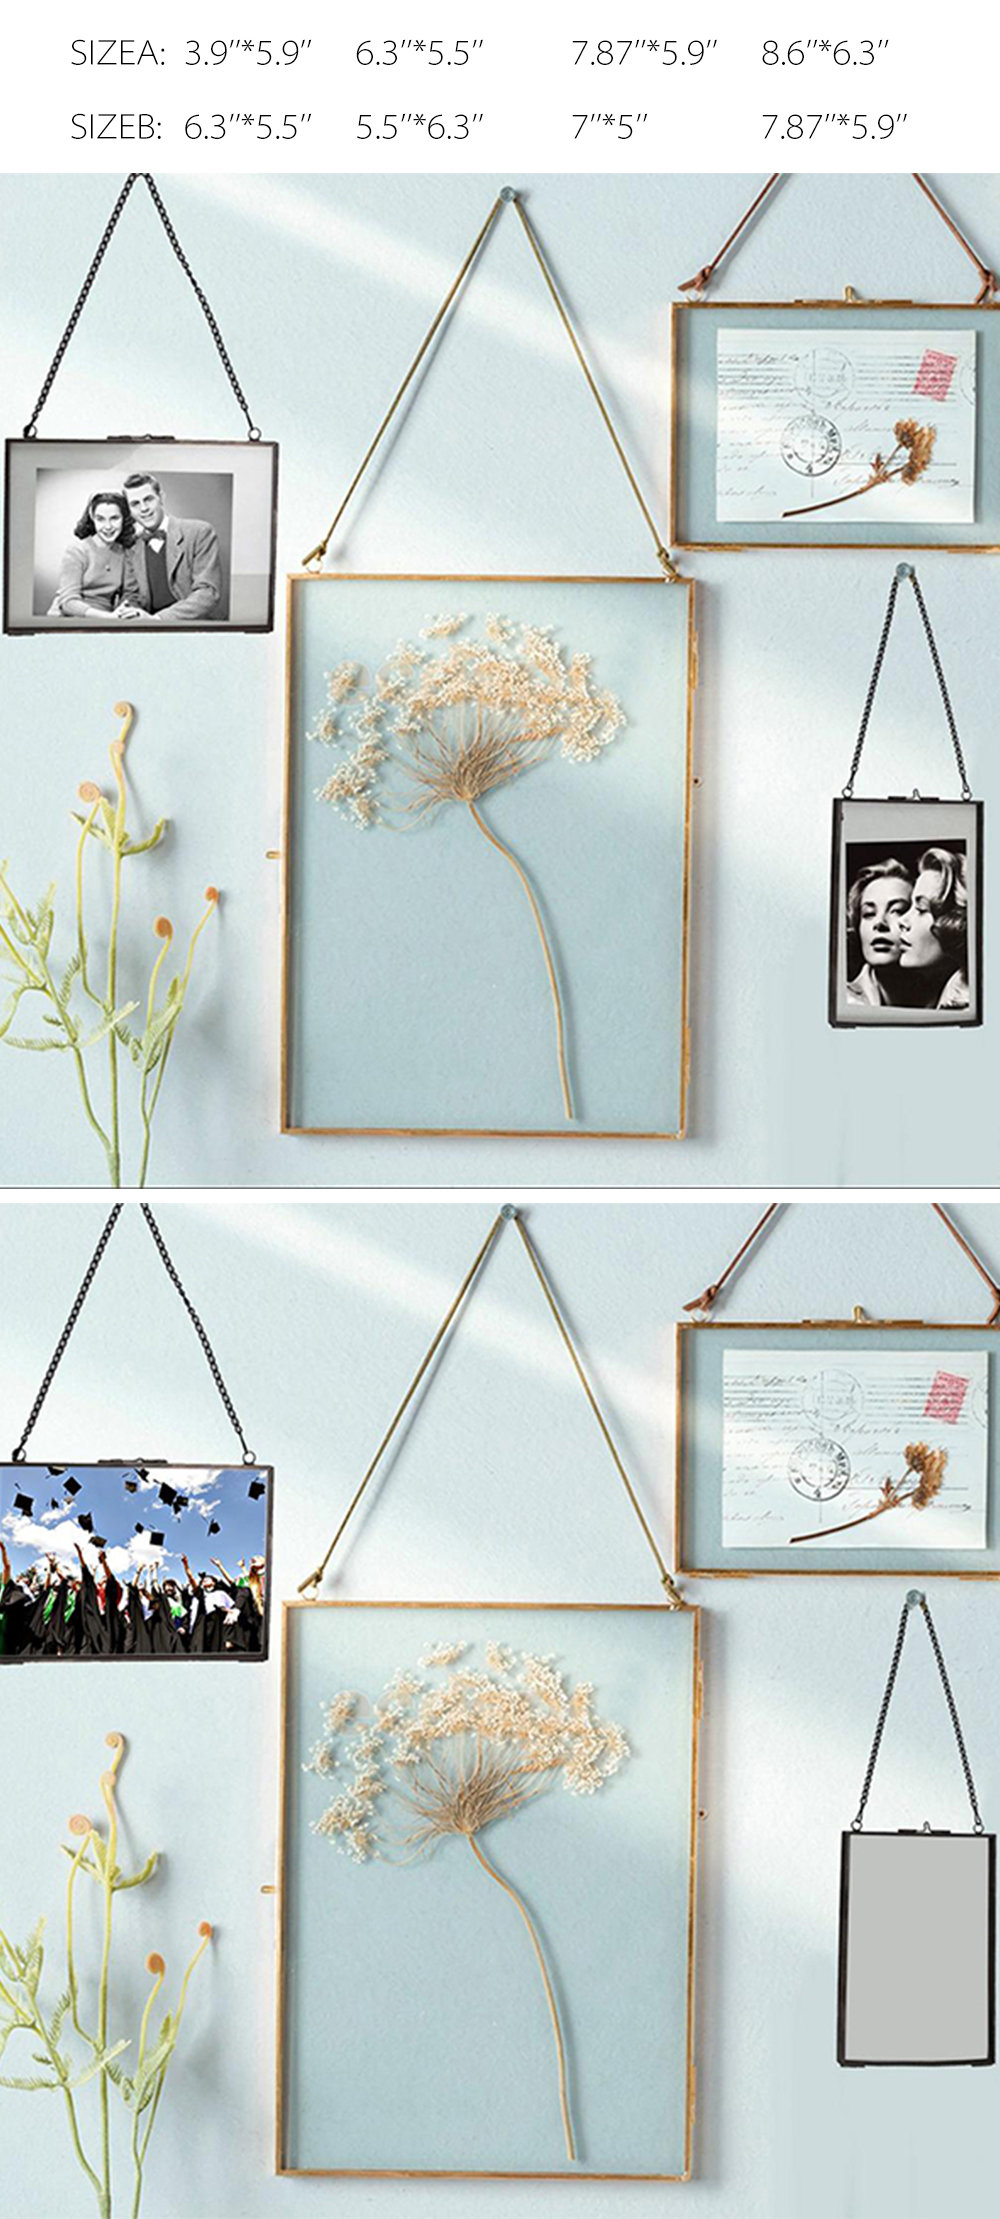 Details about   Retro Transparent Glass Hanging Photo Frame Easy to Install Dual Sided